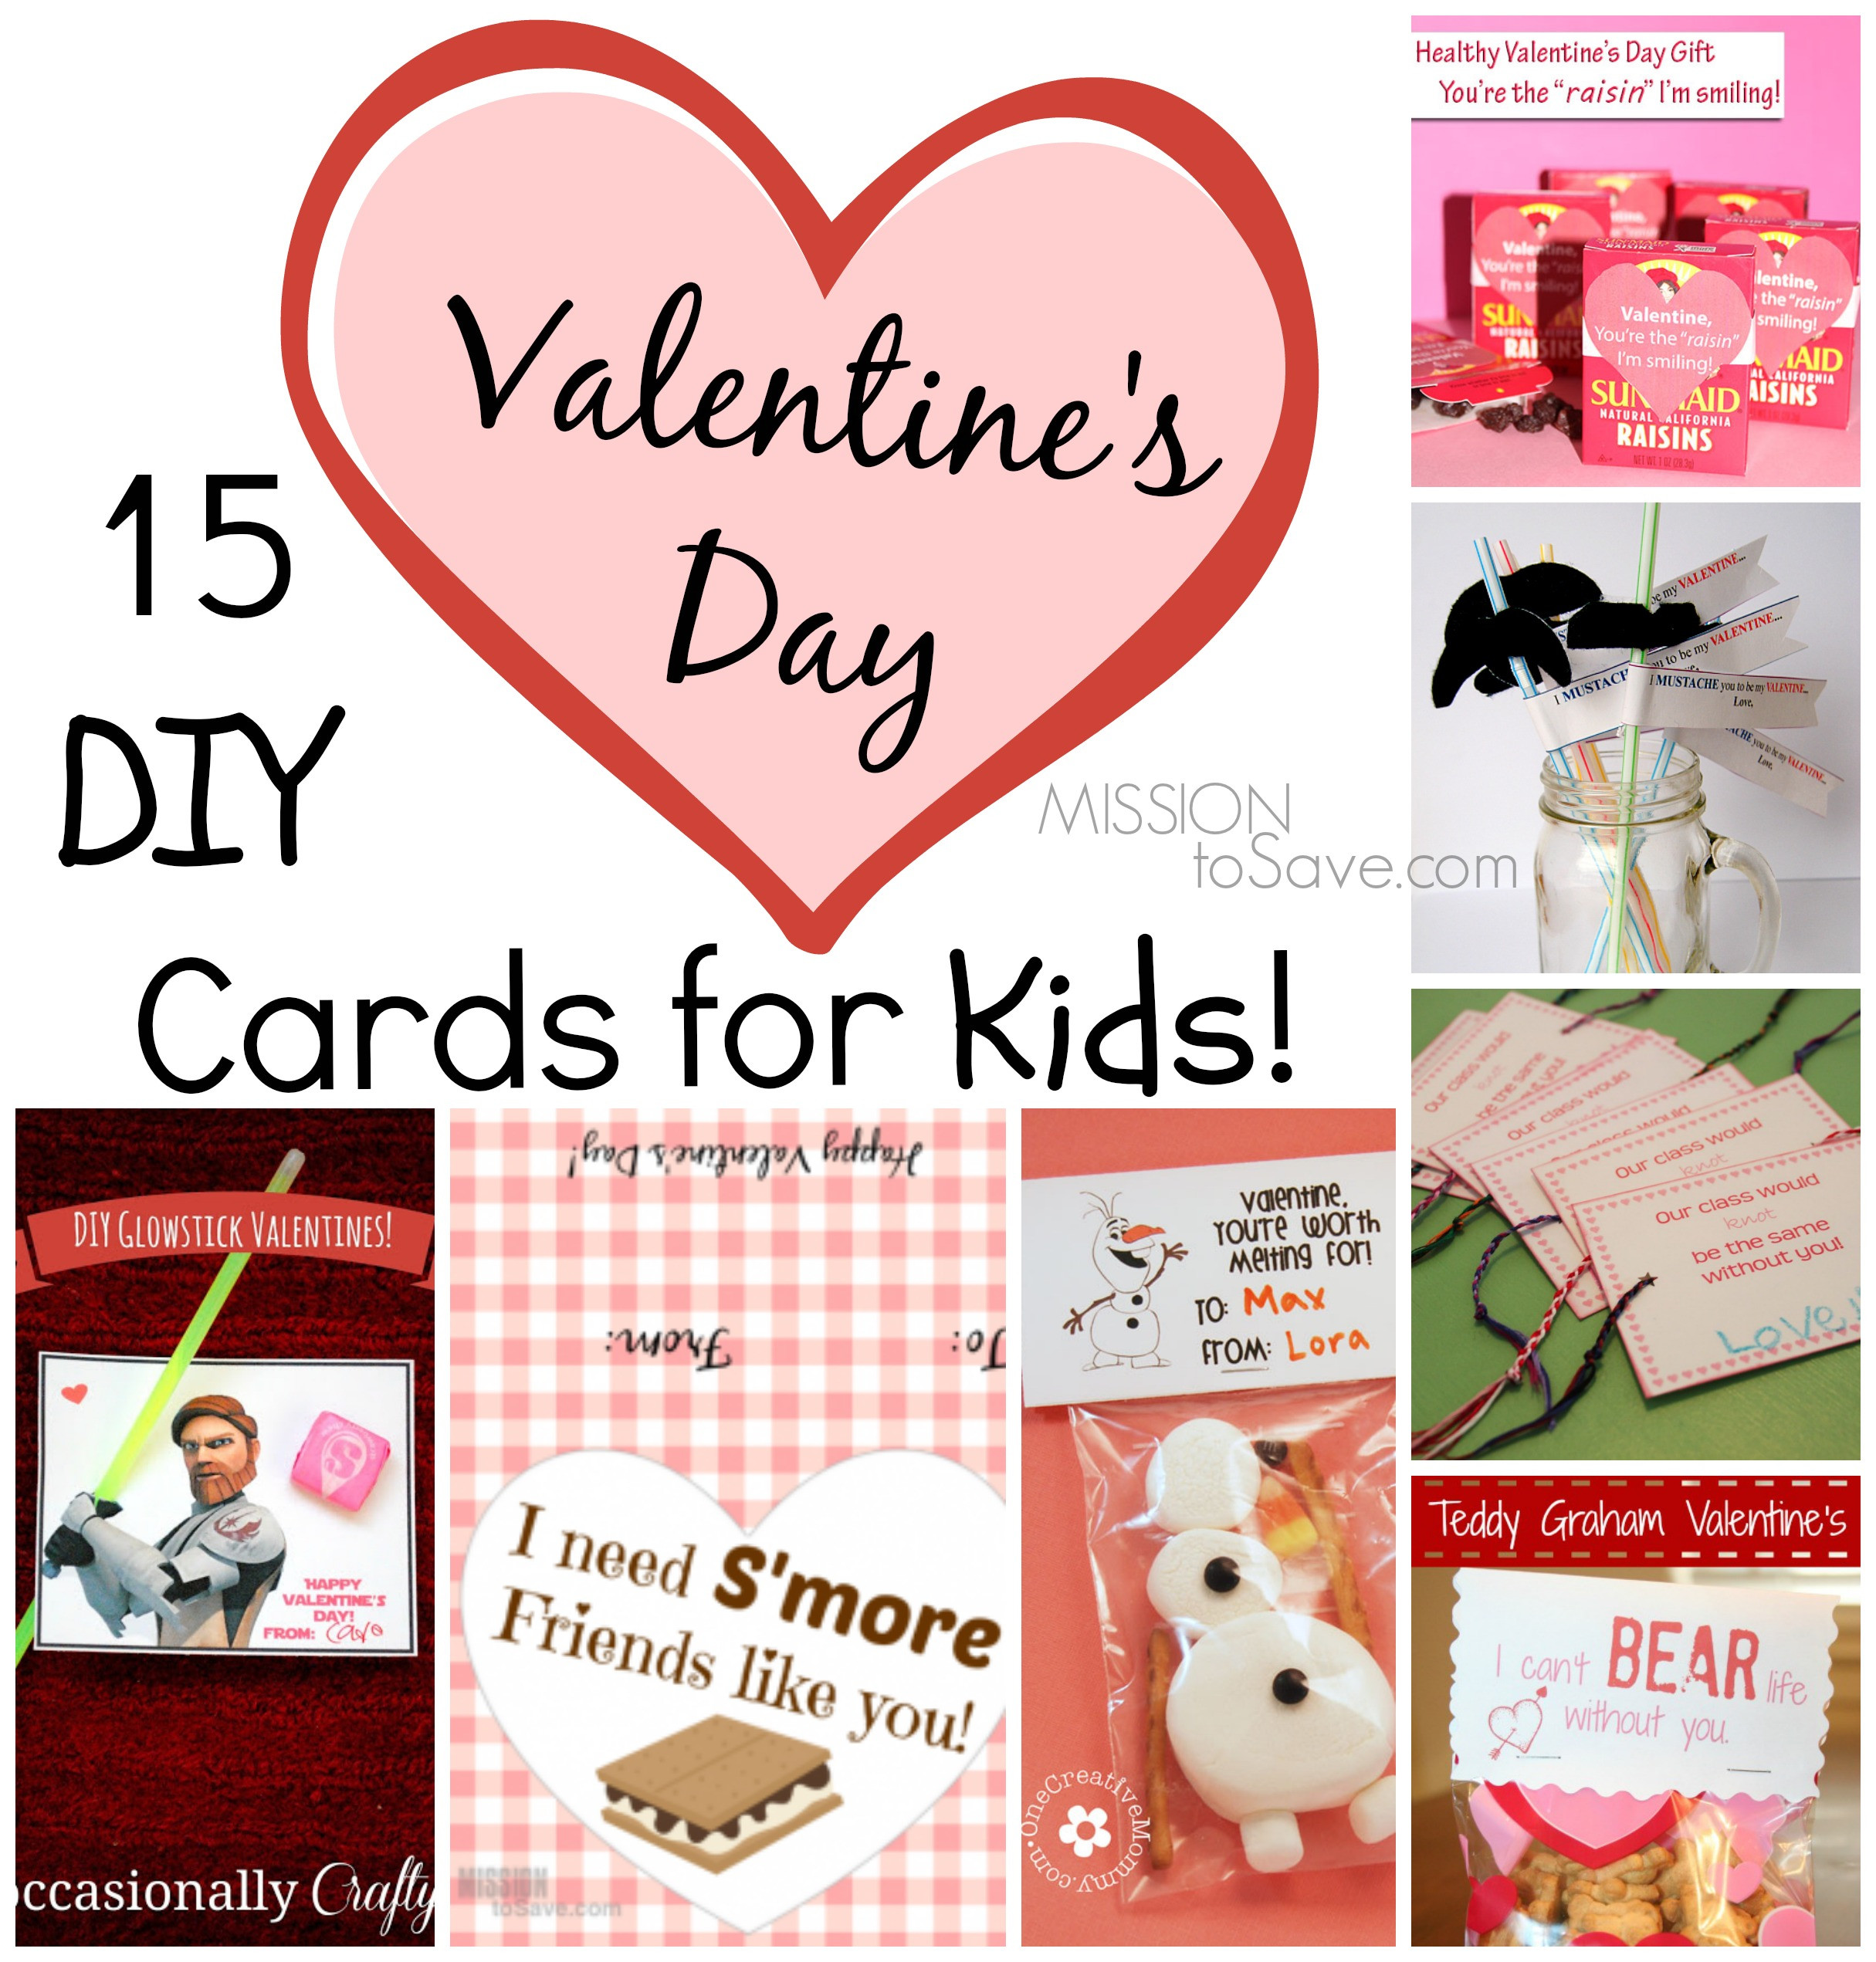 DIY Valentines Day Cards For Kids
 15 DIY Valentine Day Cards for Kids Mission to Save